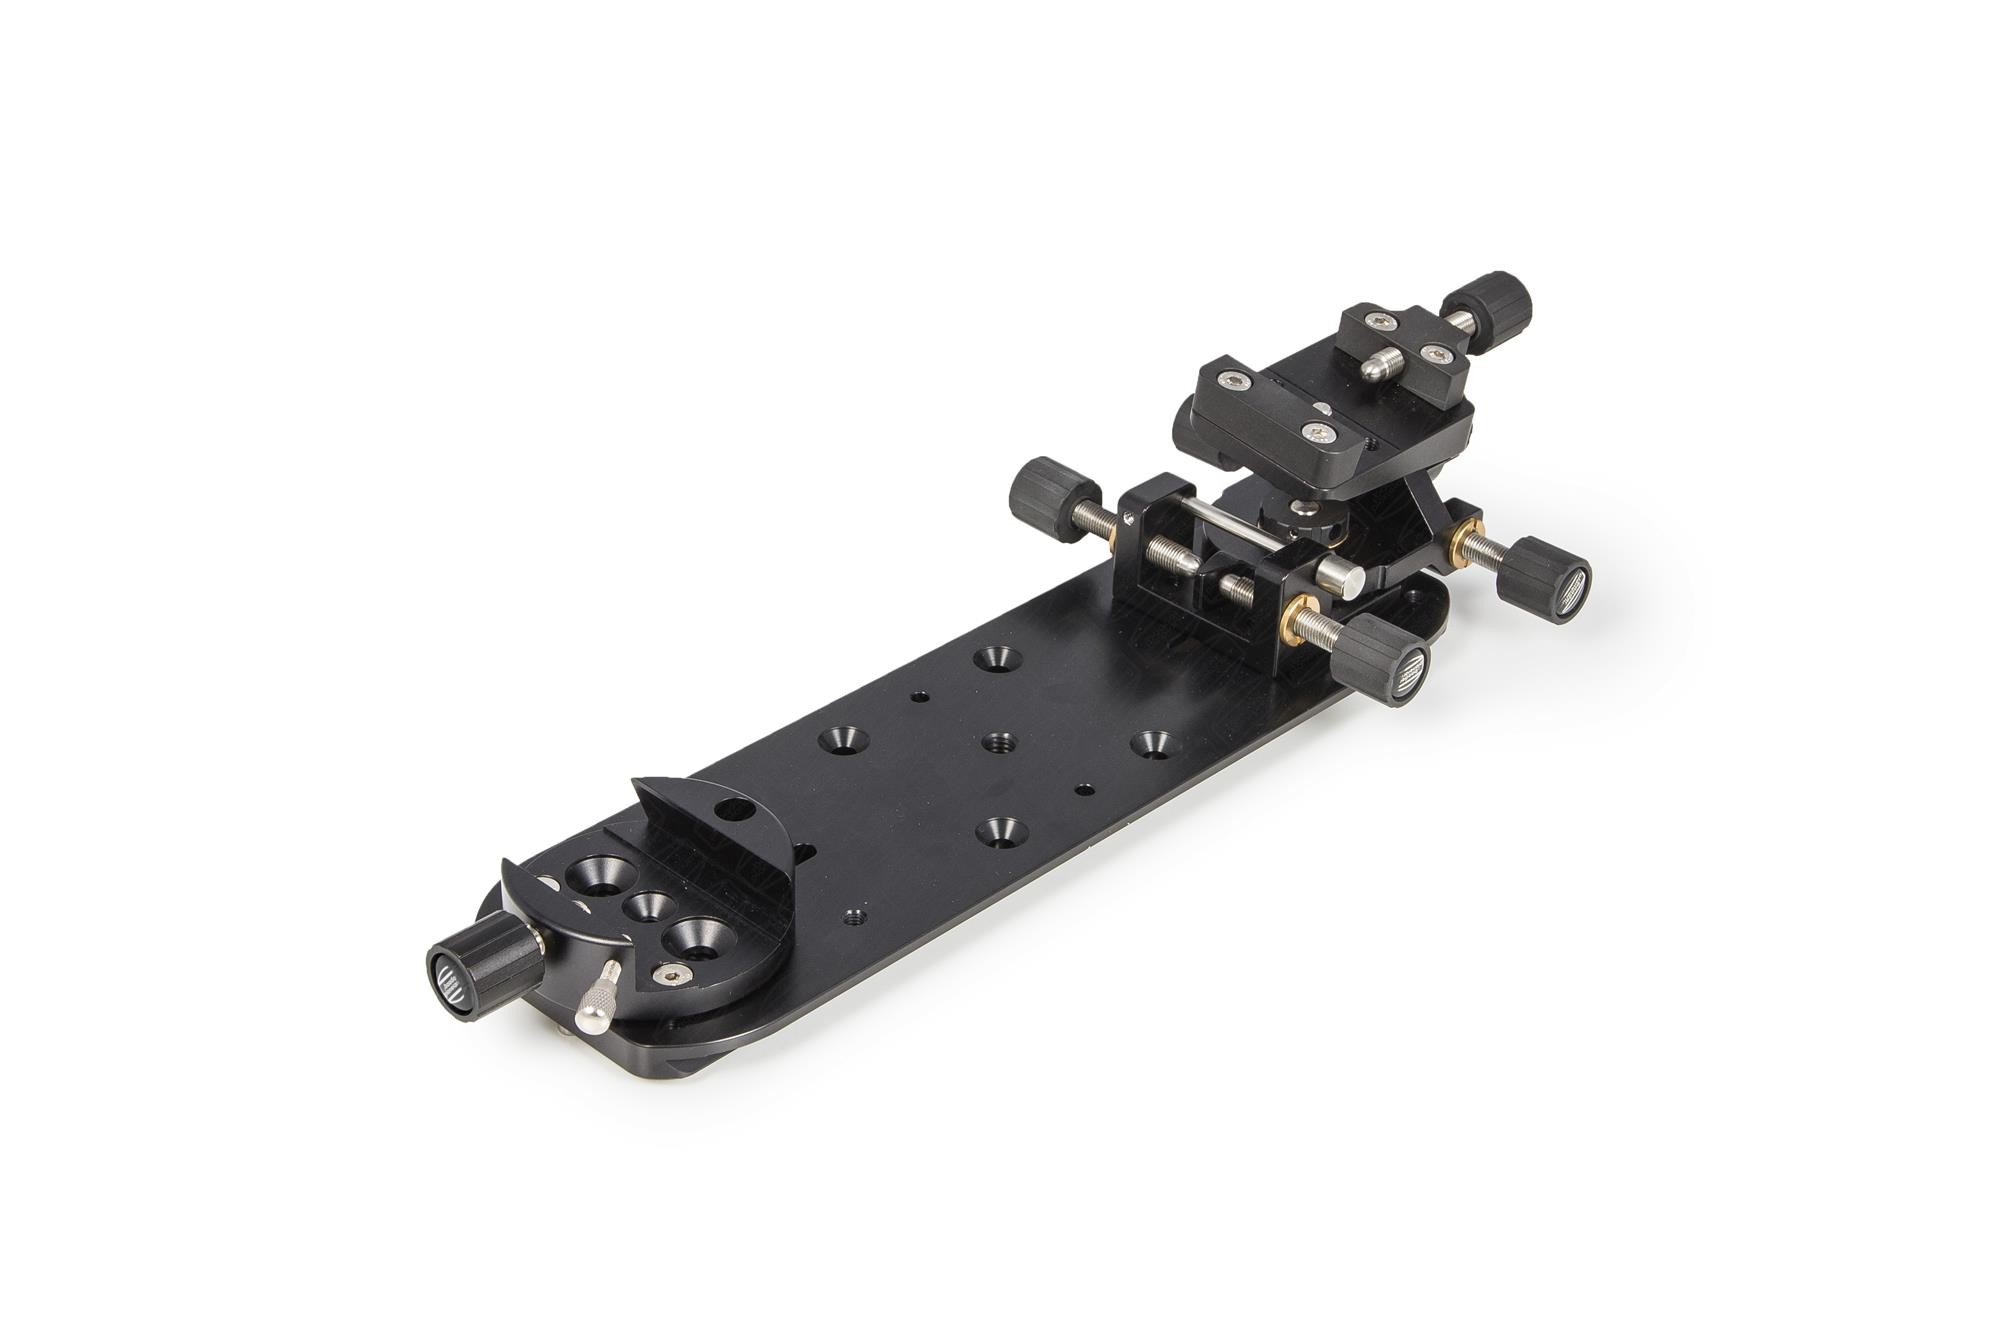 Baader double-balancing plate-set with 3" plate, V-clamp and Stronghold